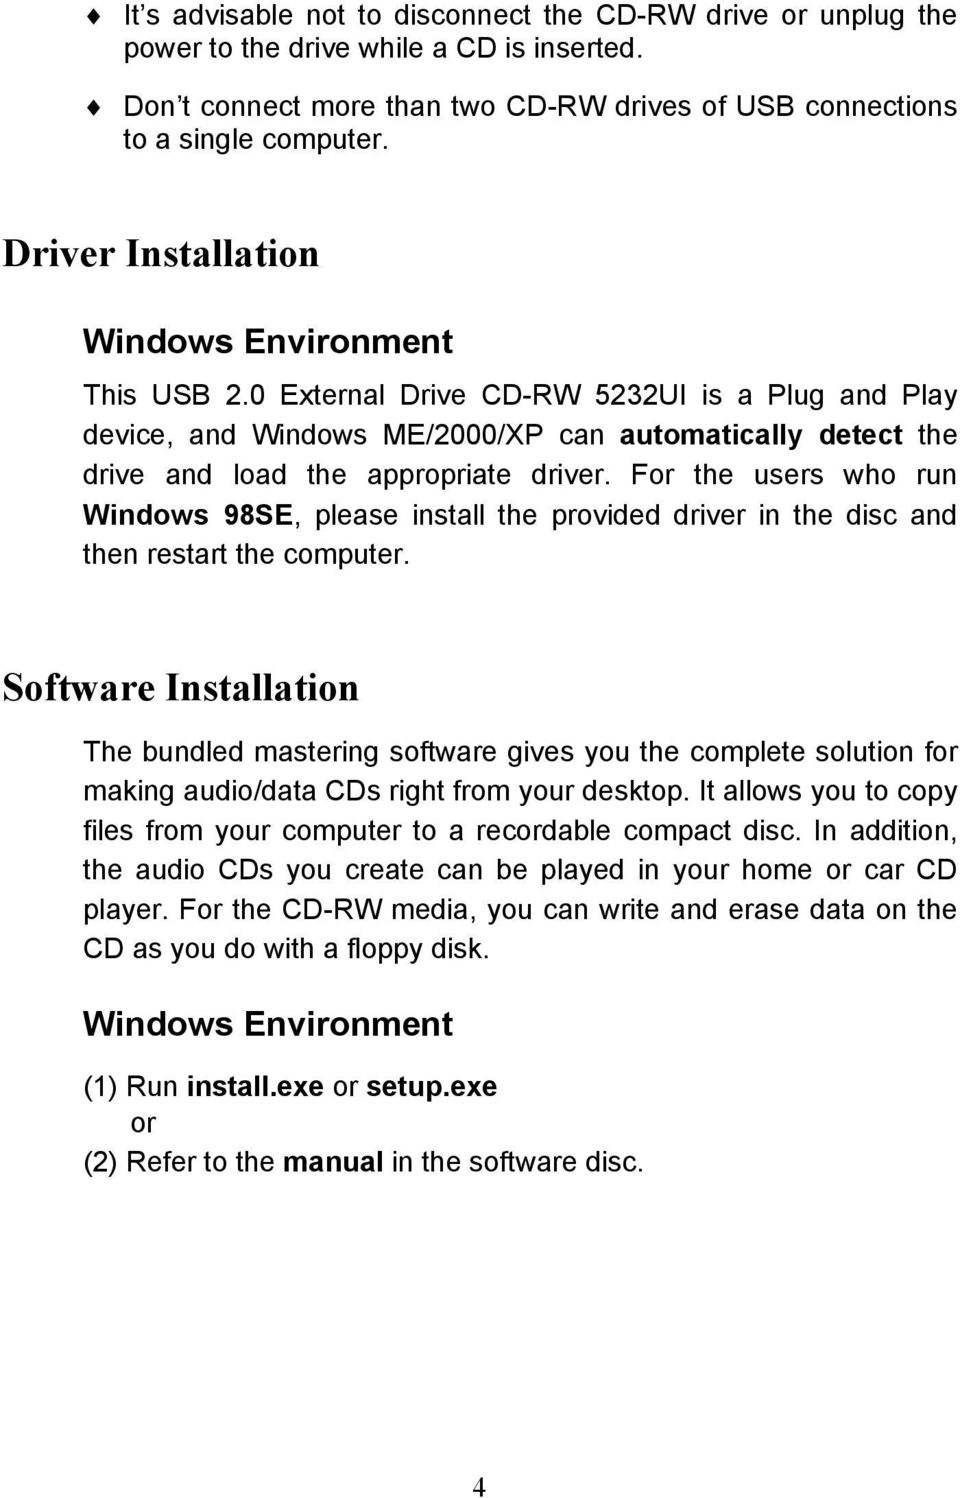 For the users who run Windows 98SE, please install the provided driver in the disc and then restart the computer.